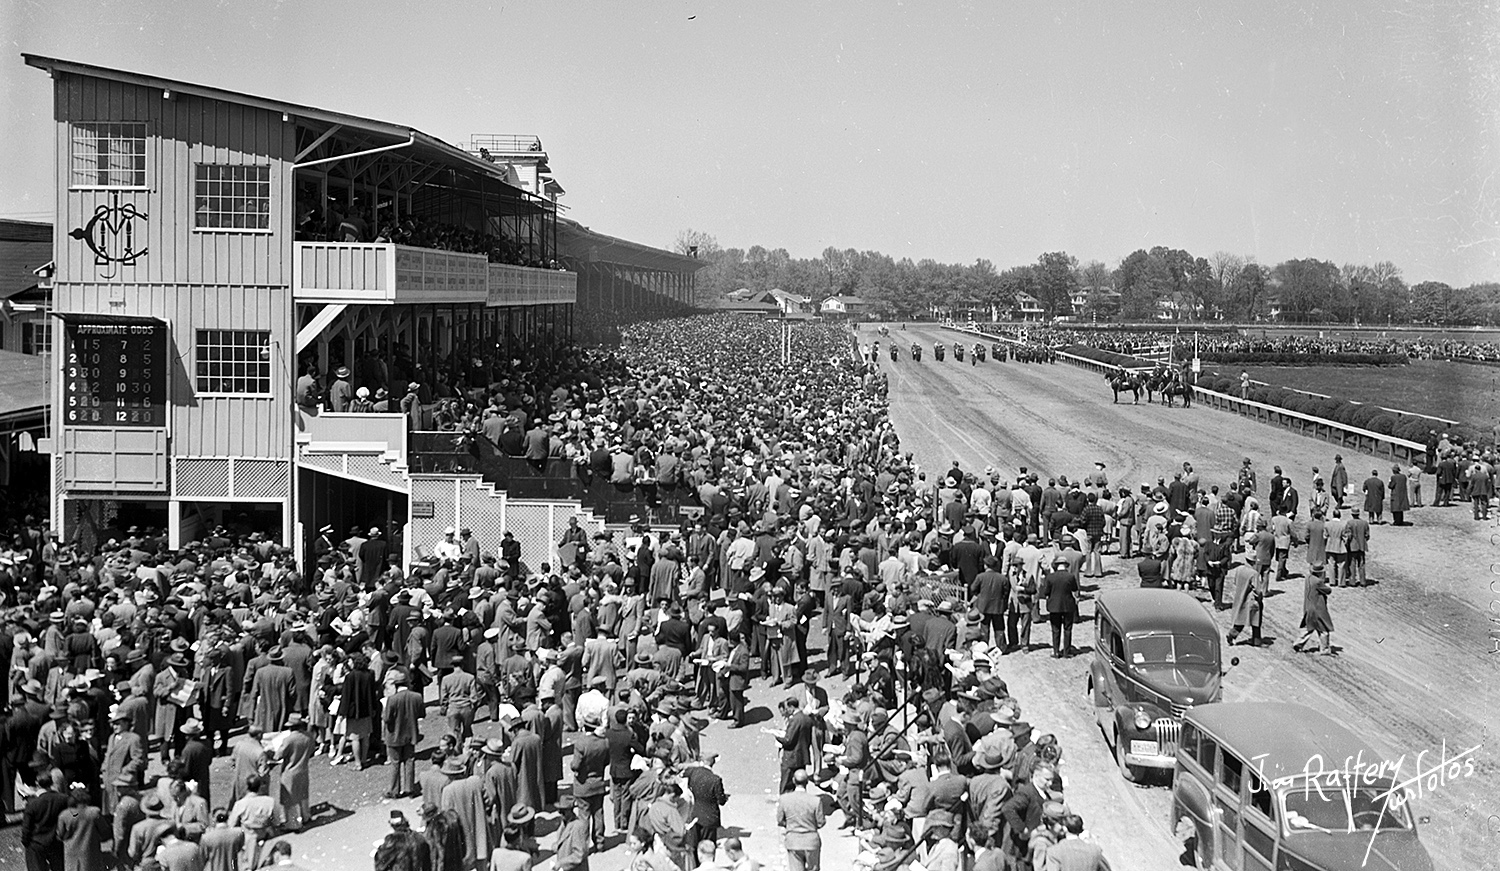 Preakness day at Pimlico Race Course, 1947 (Jim Raftery Turfotos)